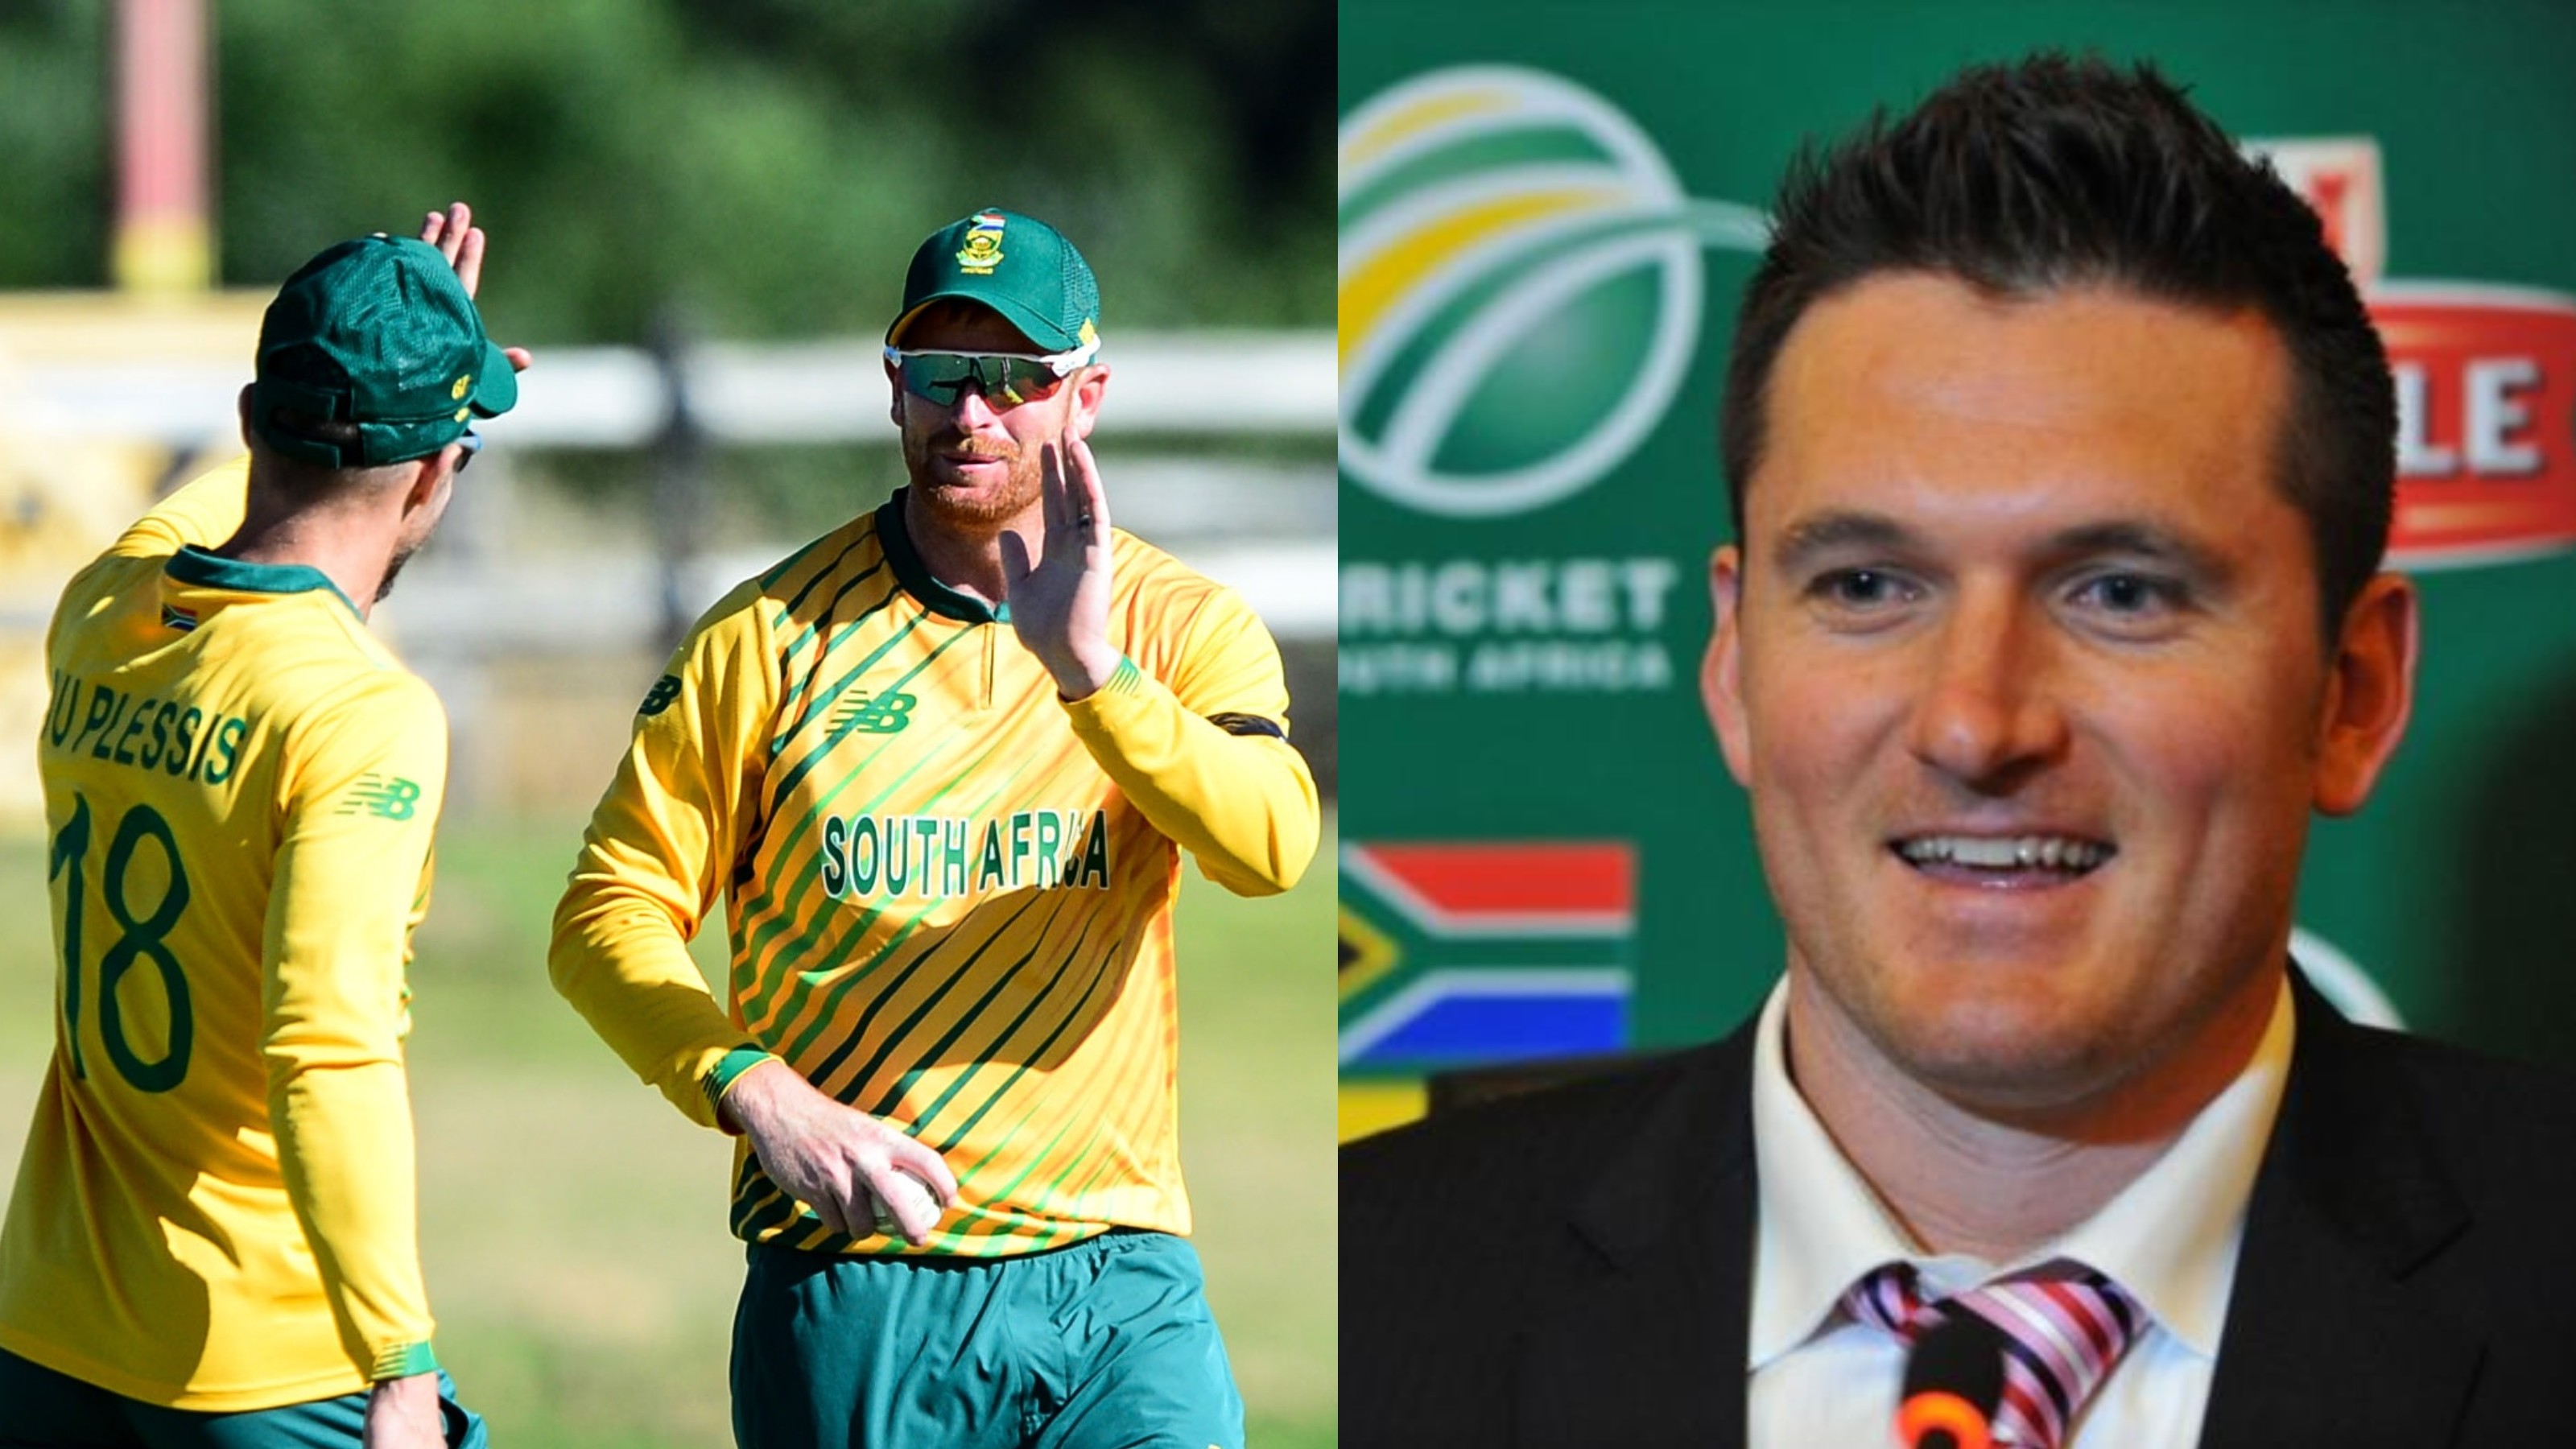 PAK v SA 2021: South Africa will play Pakistan with two different squads, reveals Graeme Smith